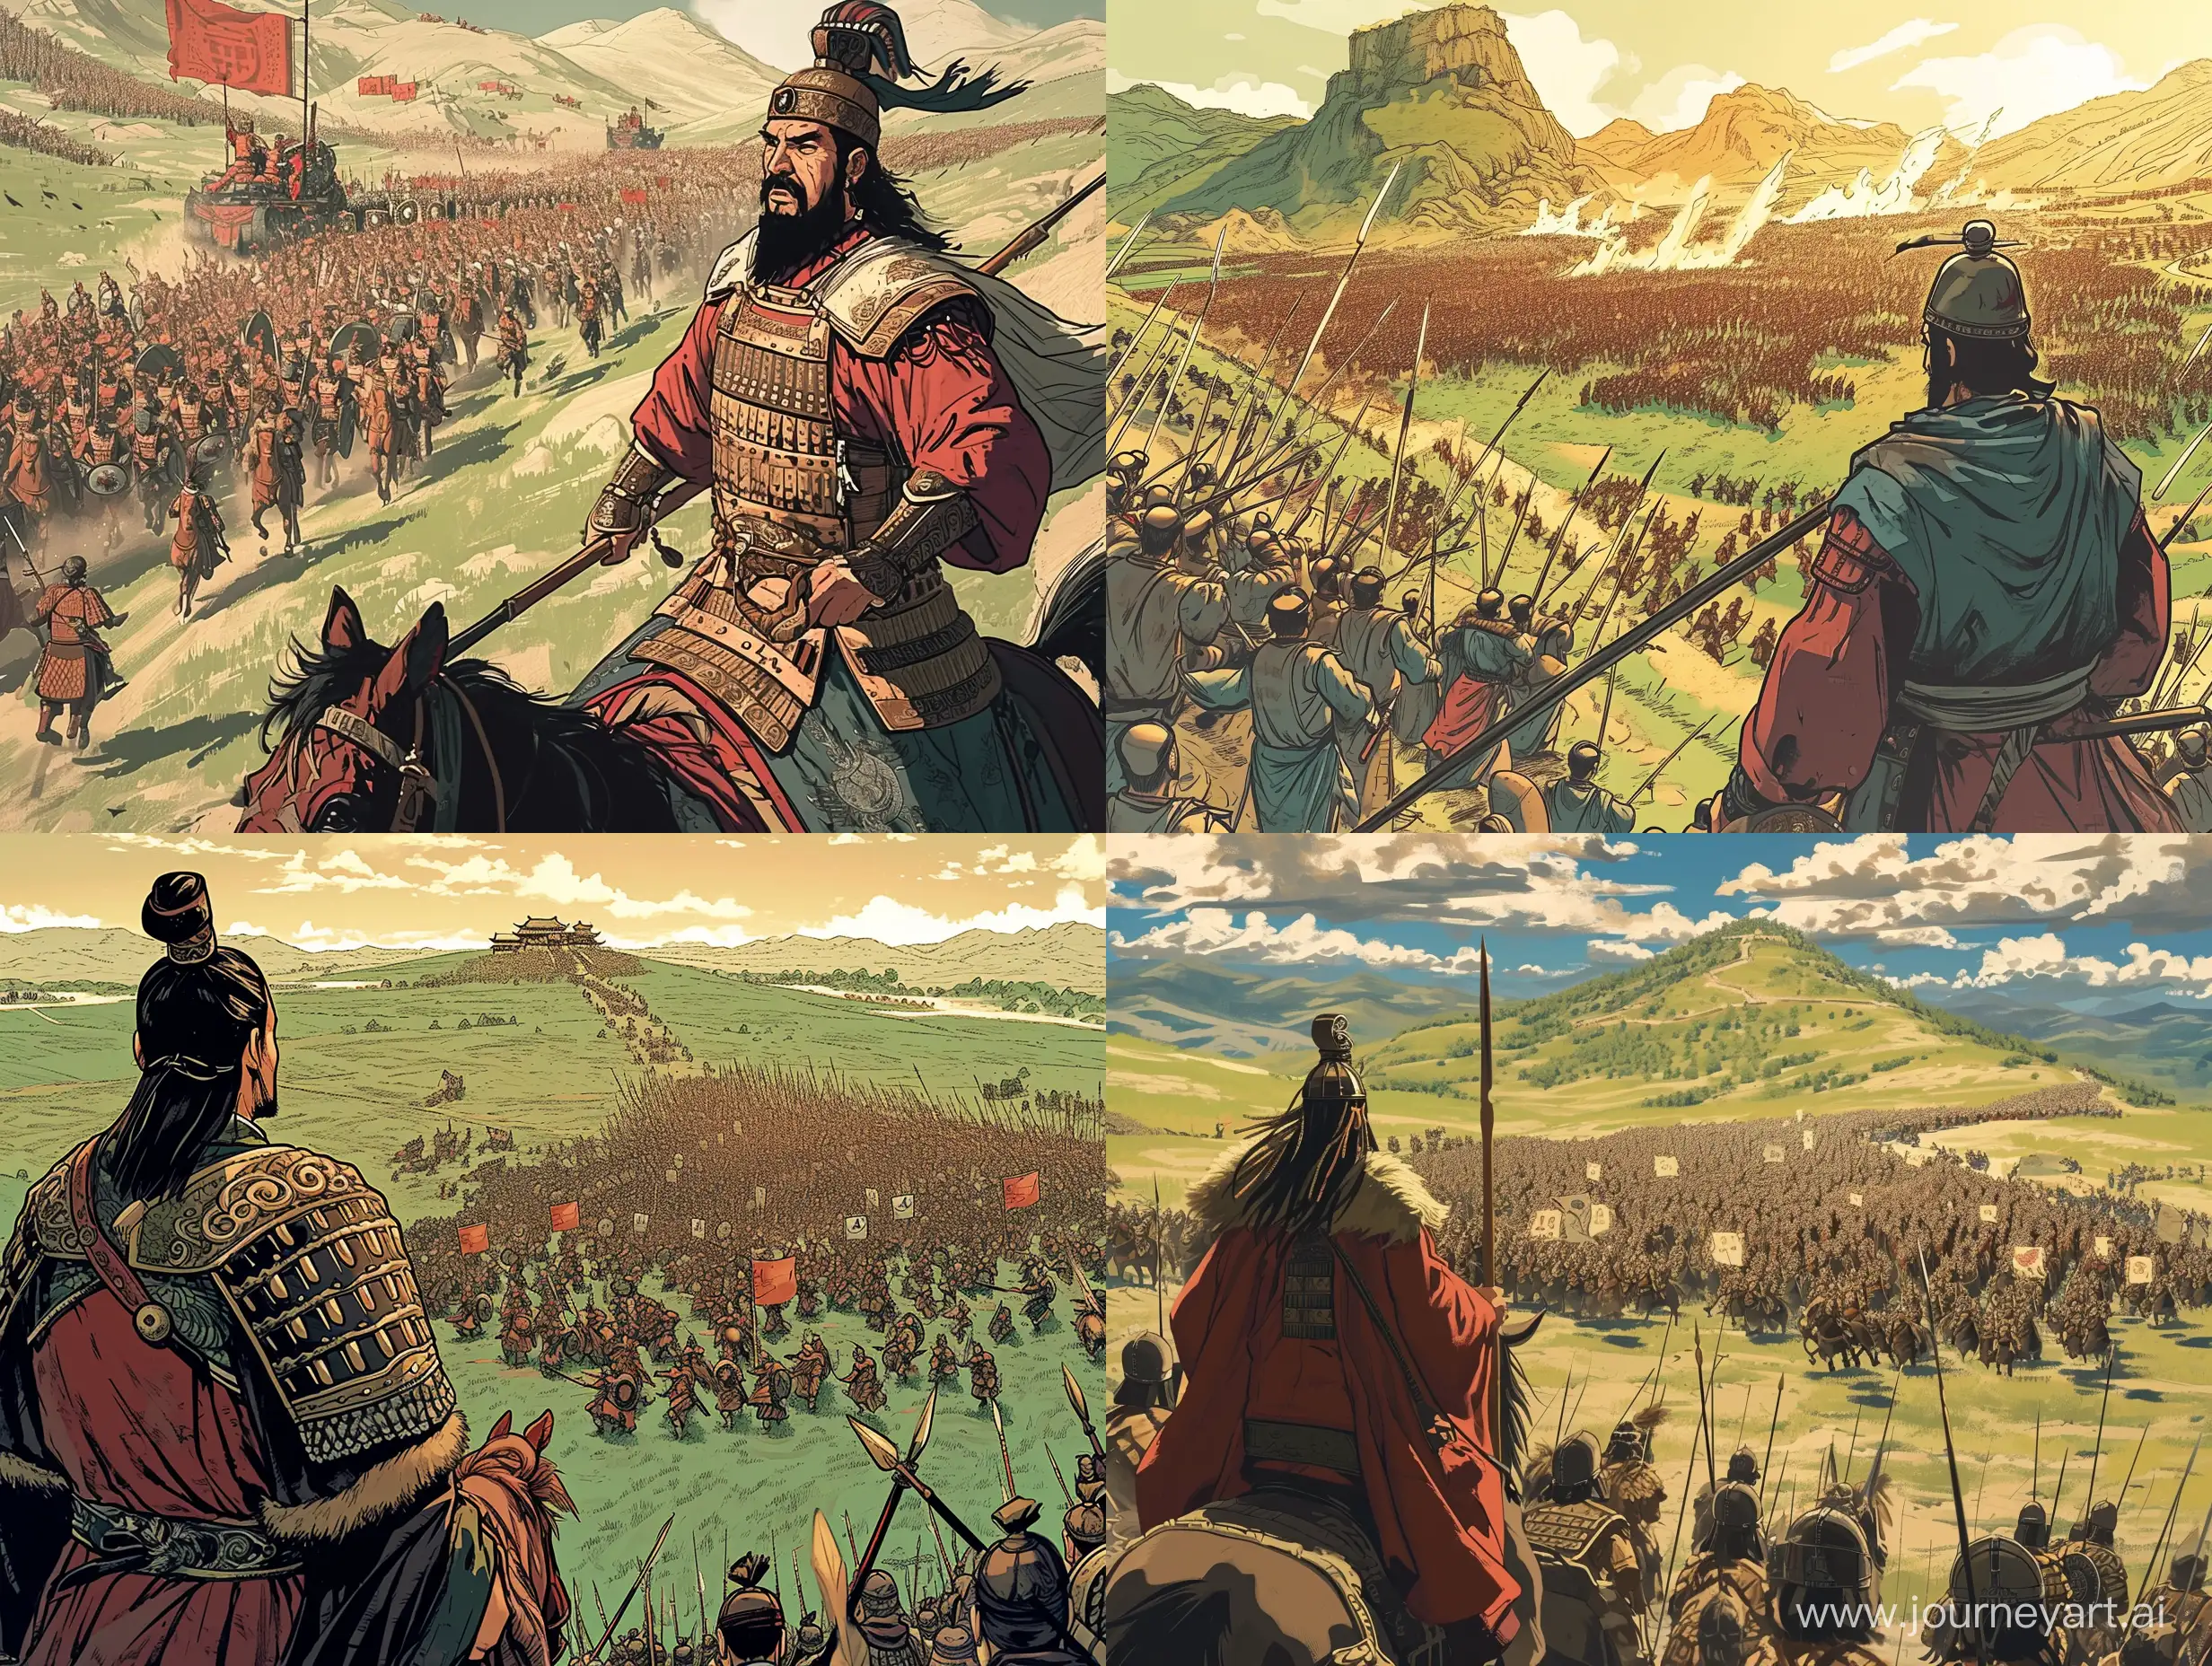 Epic-Battle-Ancient-Chinese-General-Confronts-Barbarian-Forces-on-Grasslands